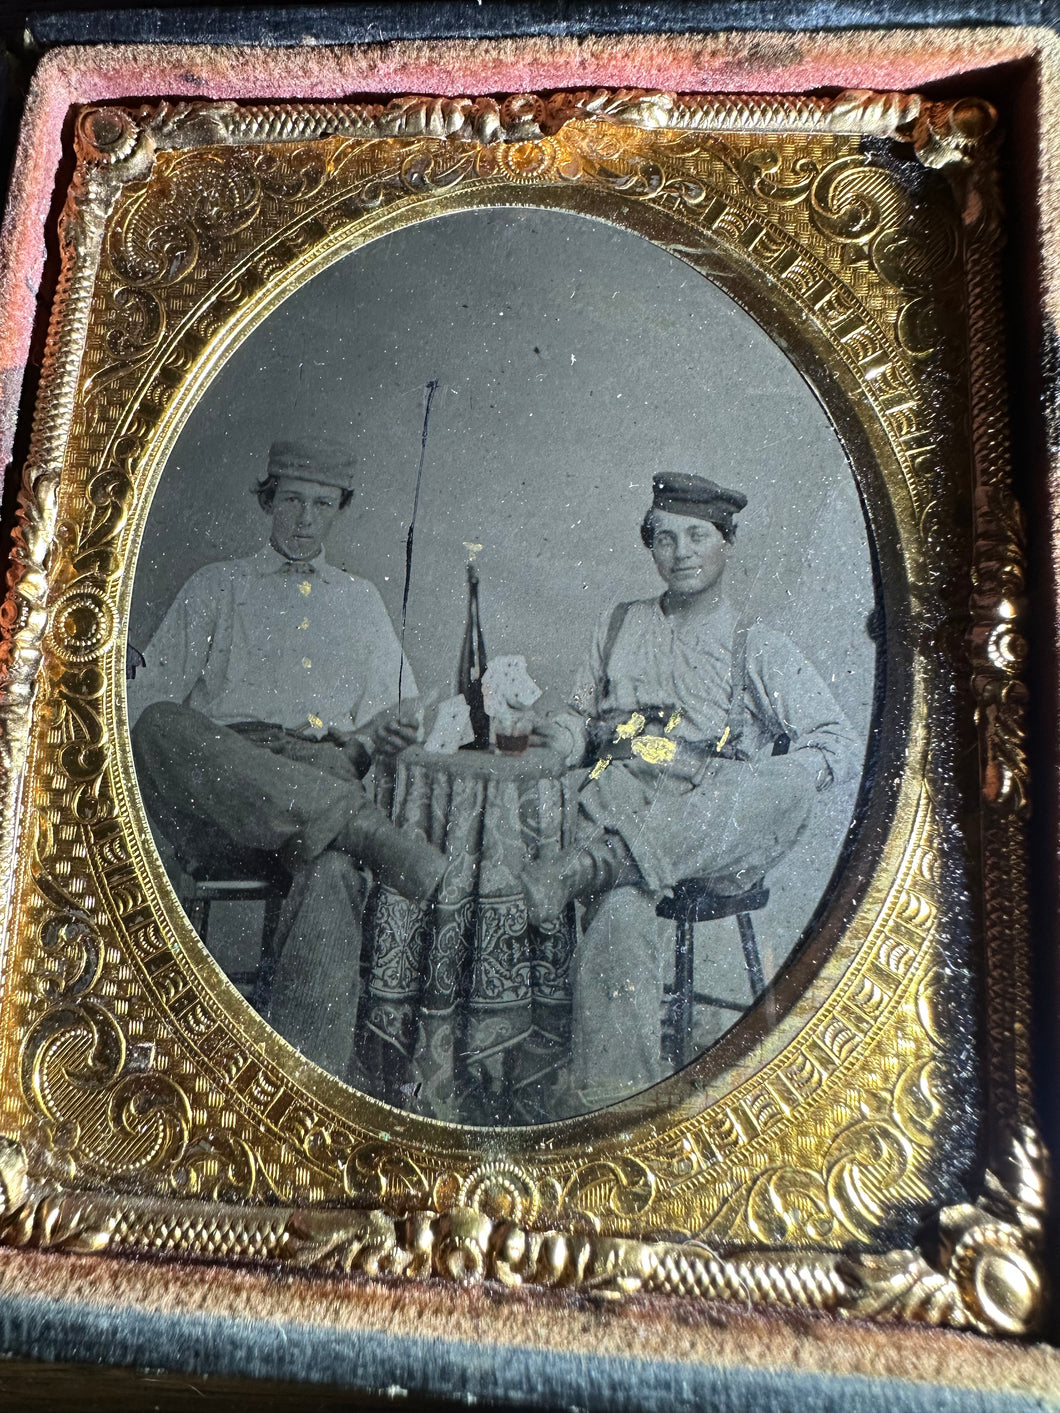 Young Poker Players / Civil War Soldiers? Painted Gold Buttons + Gun 1/6 Tintype